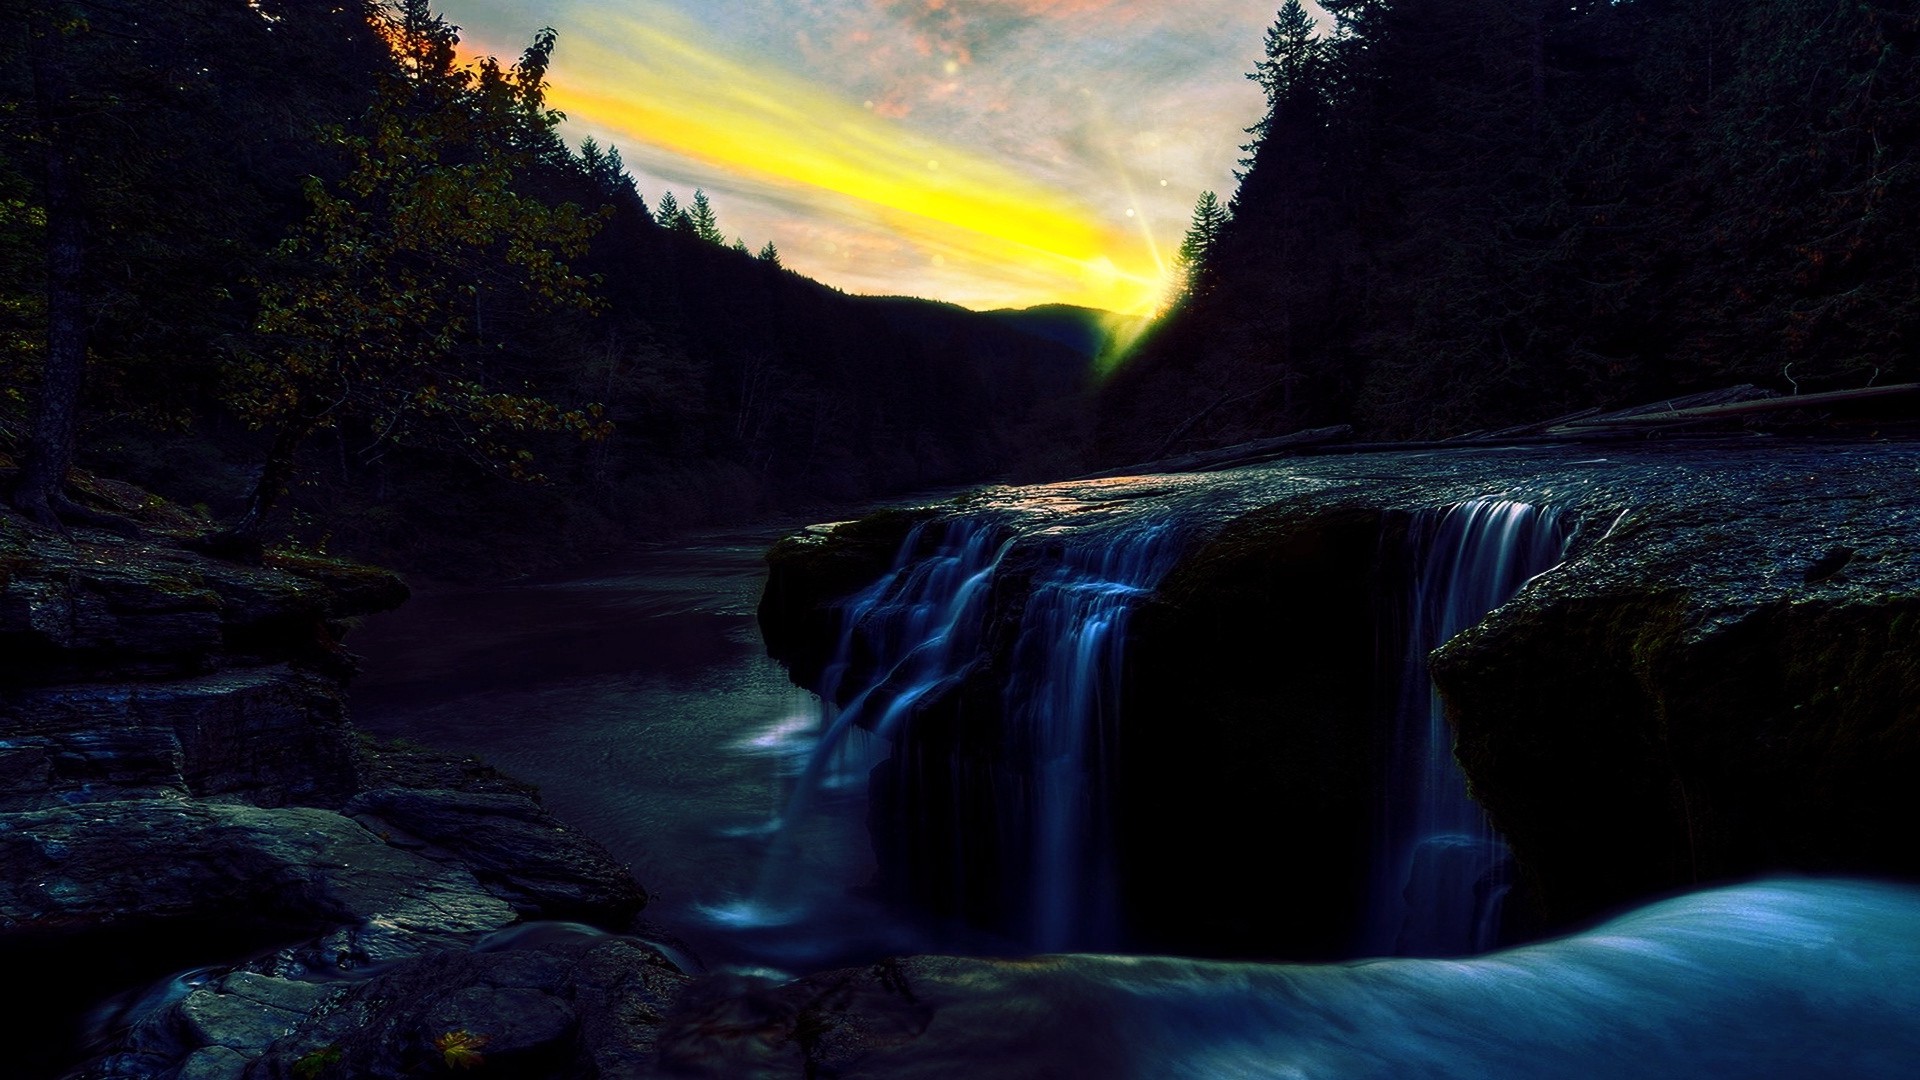 1920x1080 wallpapers: forest, river, waterfall, cliff, stones, evening, landscape, dusk (image)